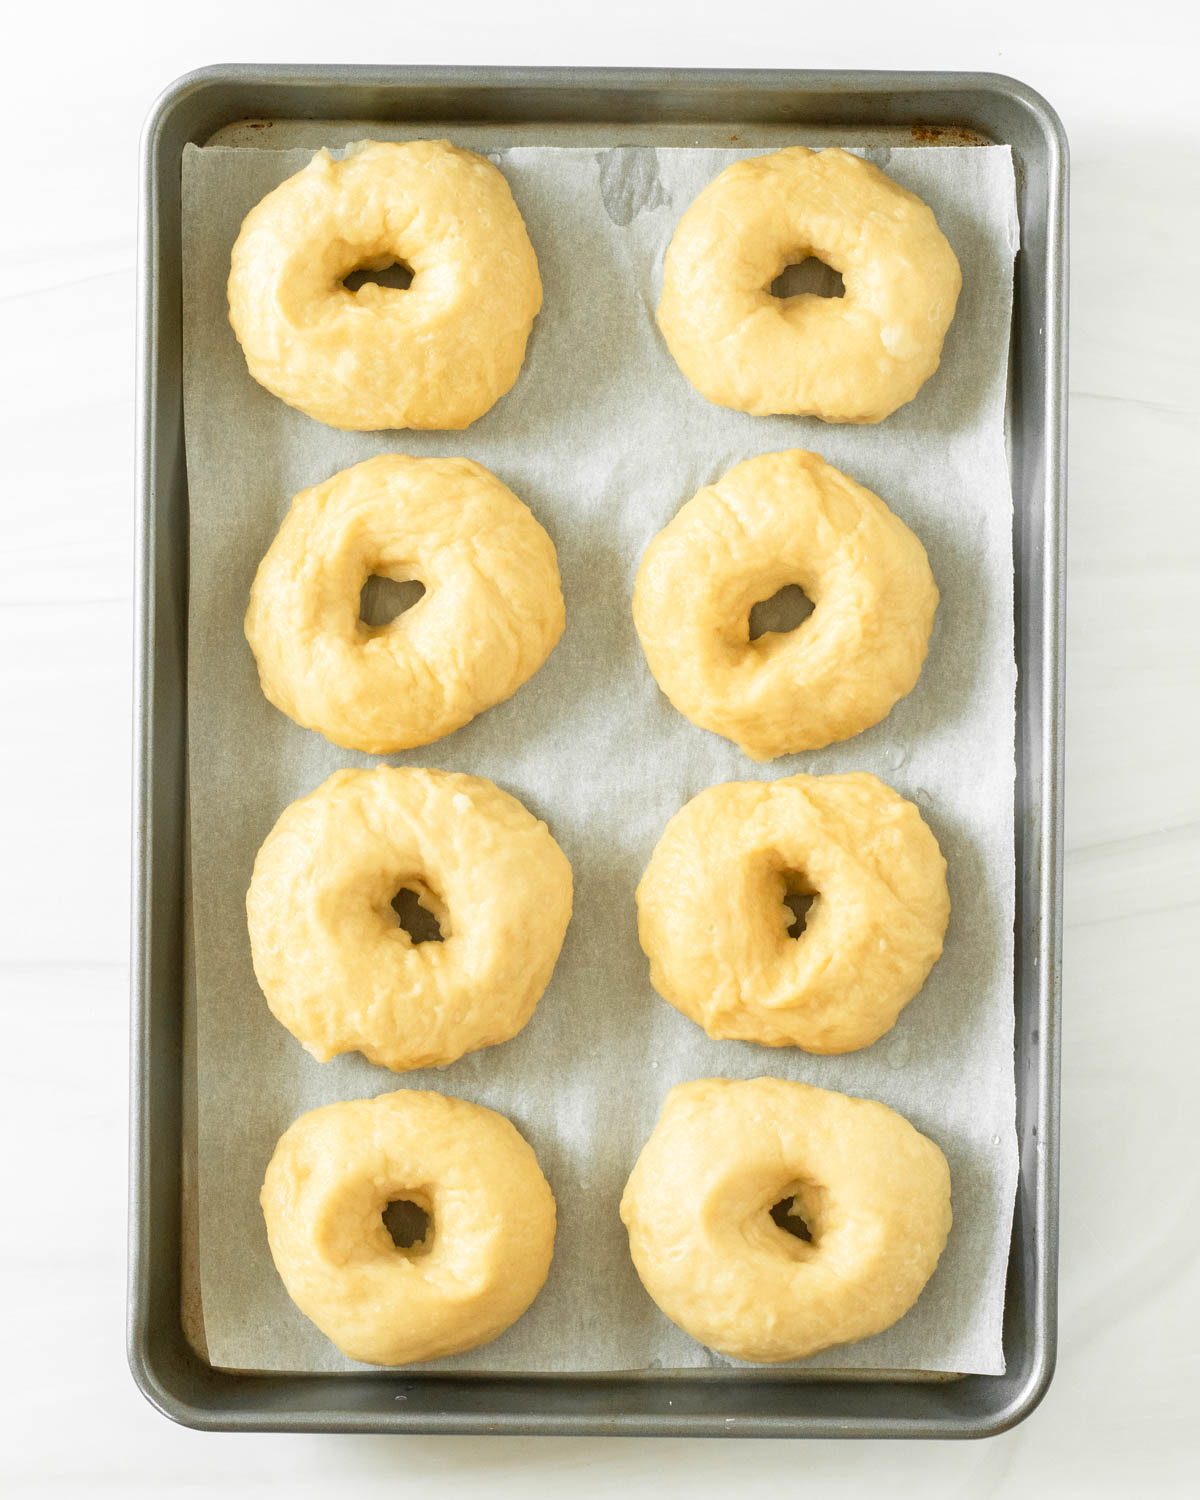 Step 8. Place the boiled bagels on a sheet pan